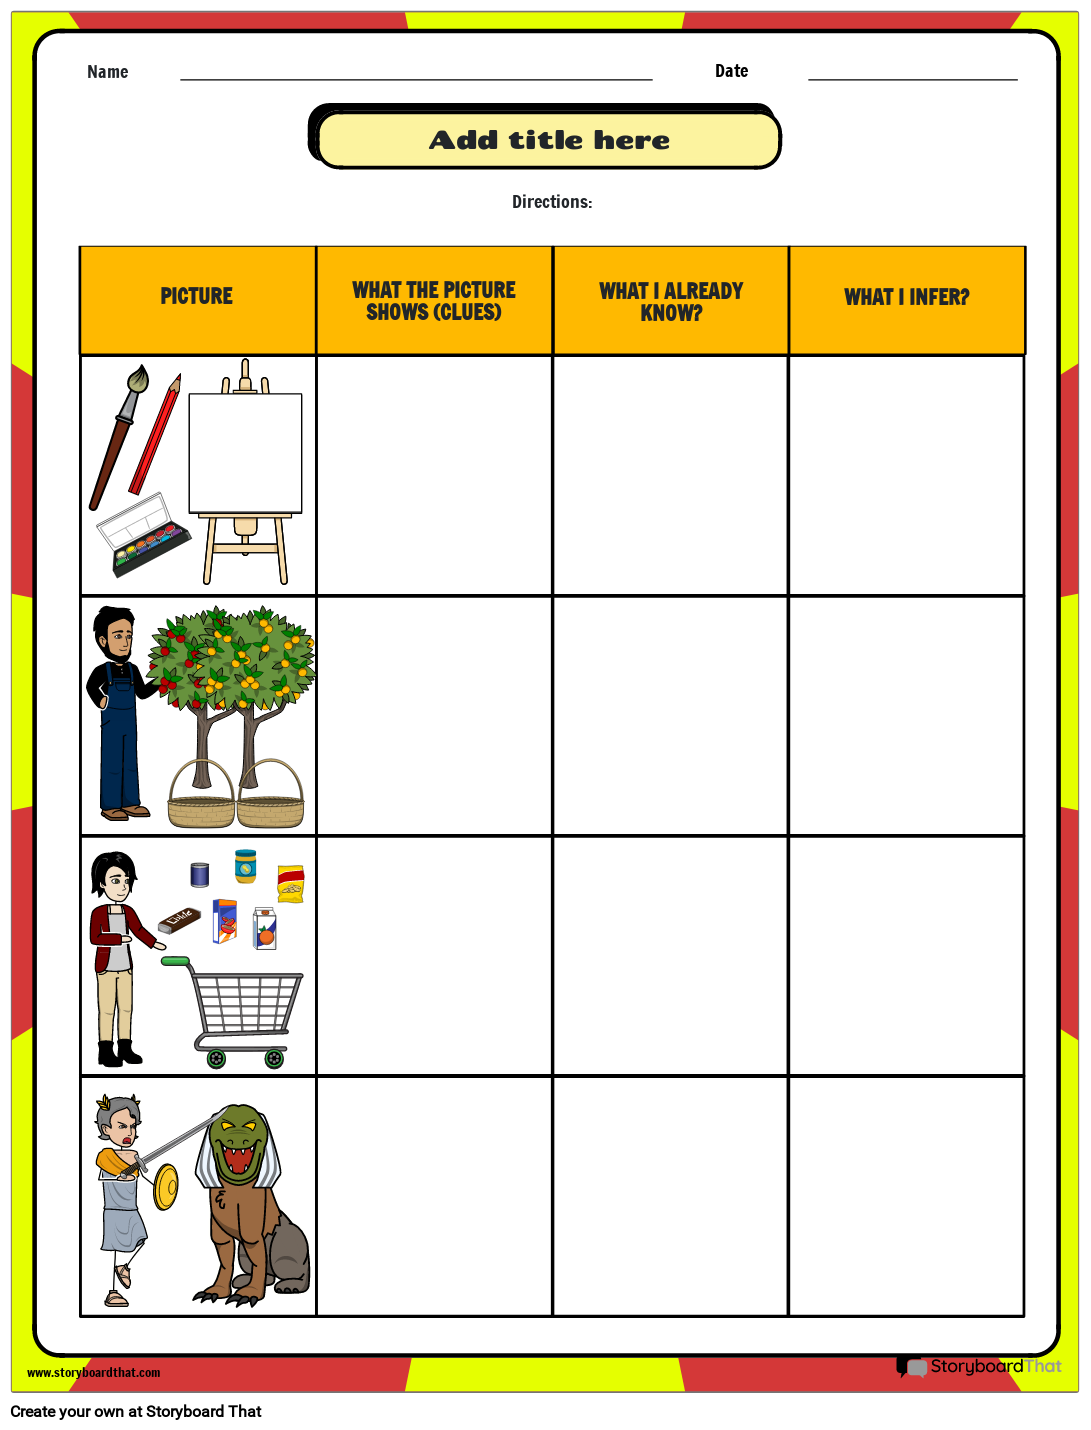 Making Inferences Based on Pictures Worksheet